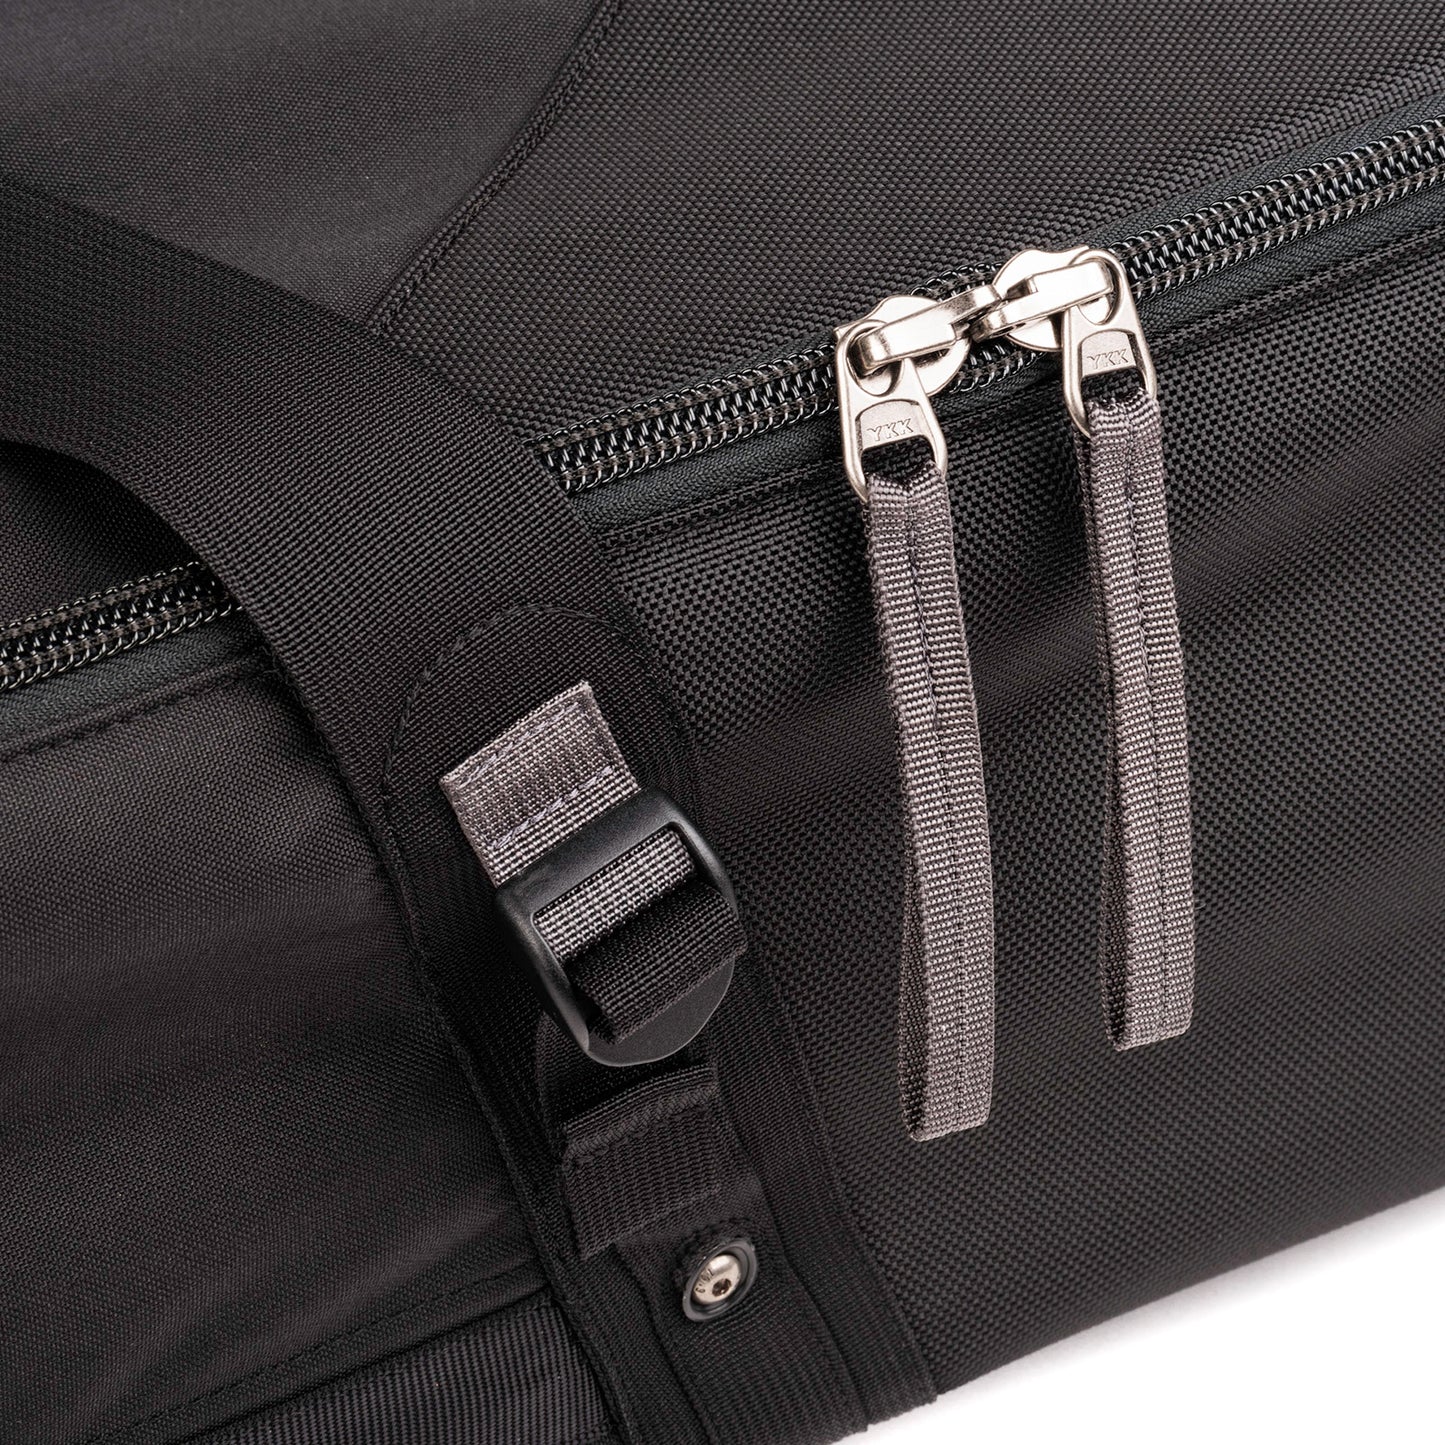 
                  
                    Built tough with highest quality materials (#10 YKK RC Fuse zippers, 1680D ballistic nylon and ABS Twinwall reinforcement) and proven high-quality construction
                  
                